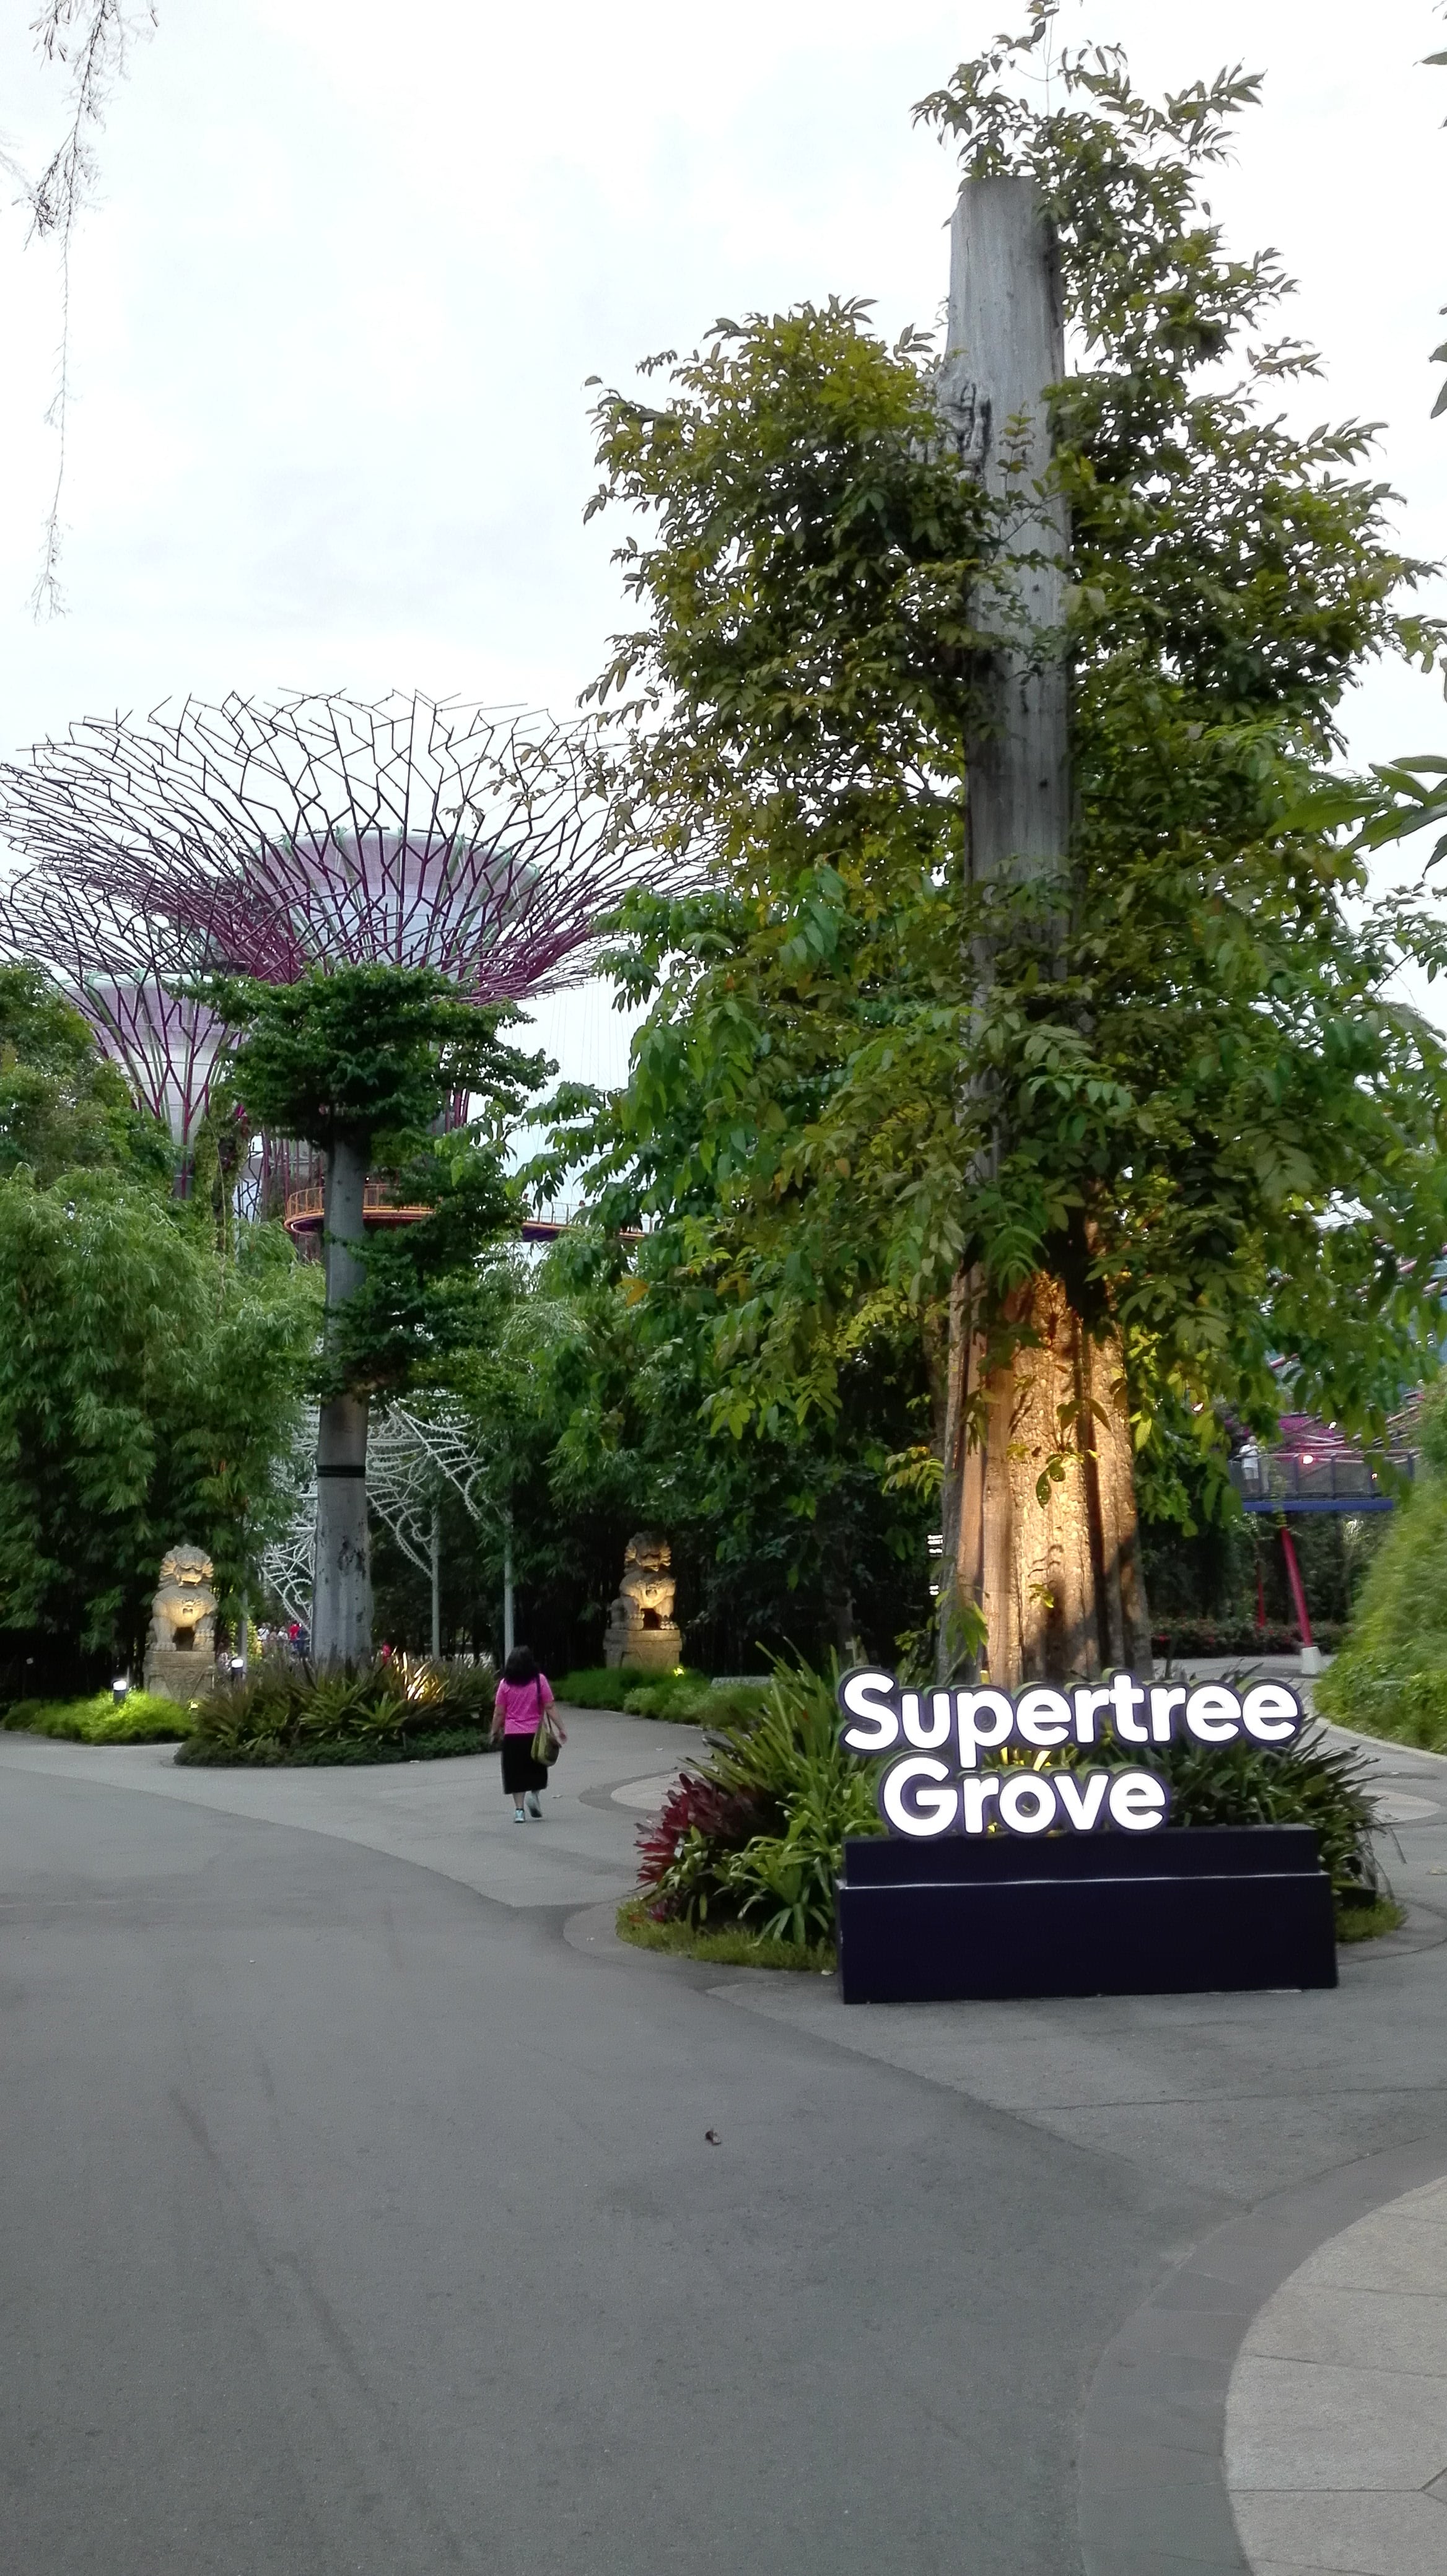 Supertree Groove